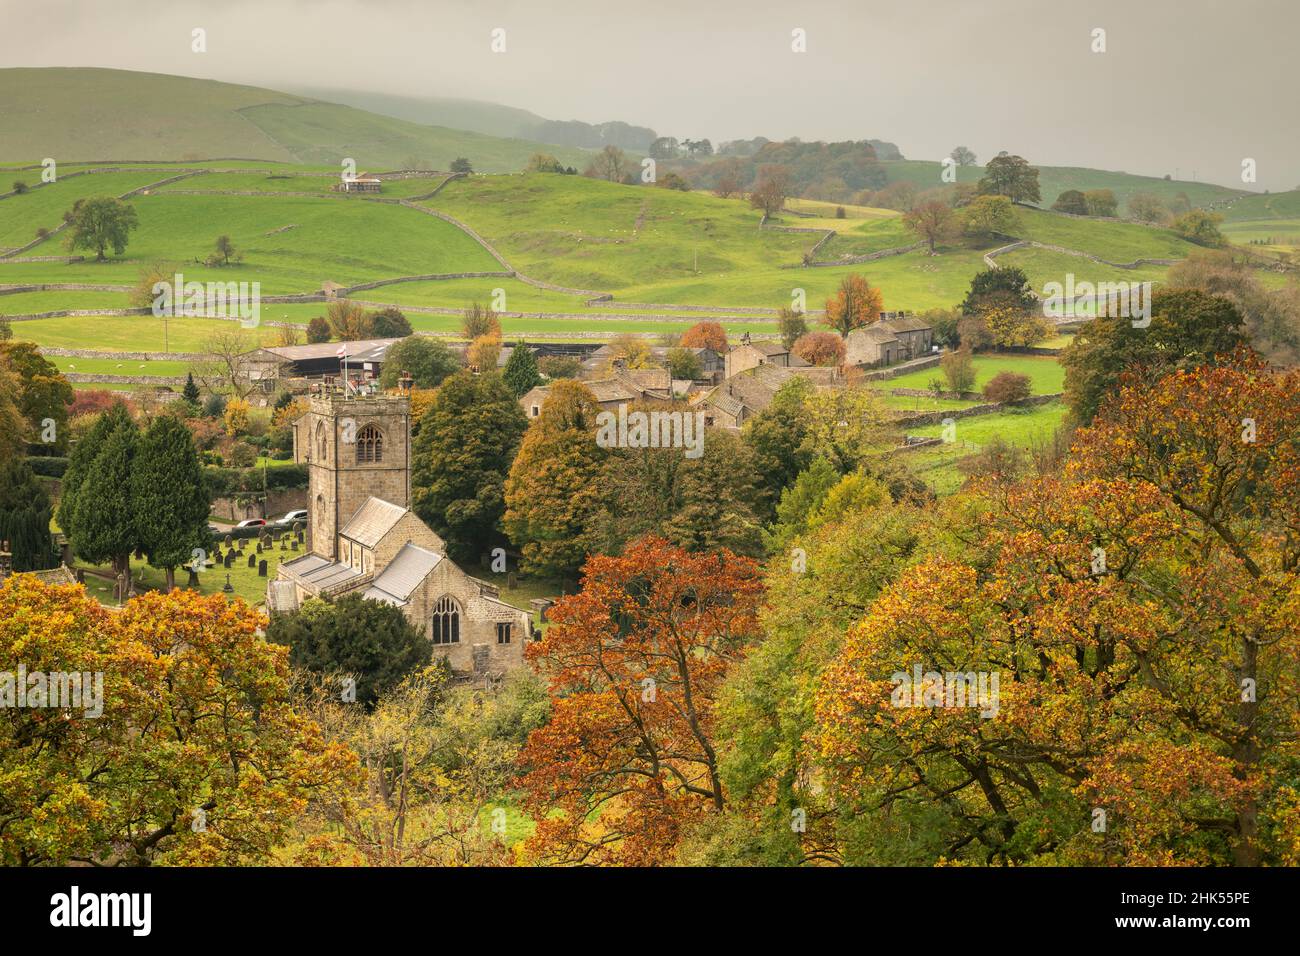 Autumn colours surround St. Wilfrid's Church in the Yorkshire Dales village of Burnsall, Wharfedale, North Yorkshire, England, United Kingdom, Europe Stock Photo